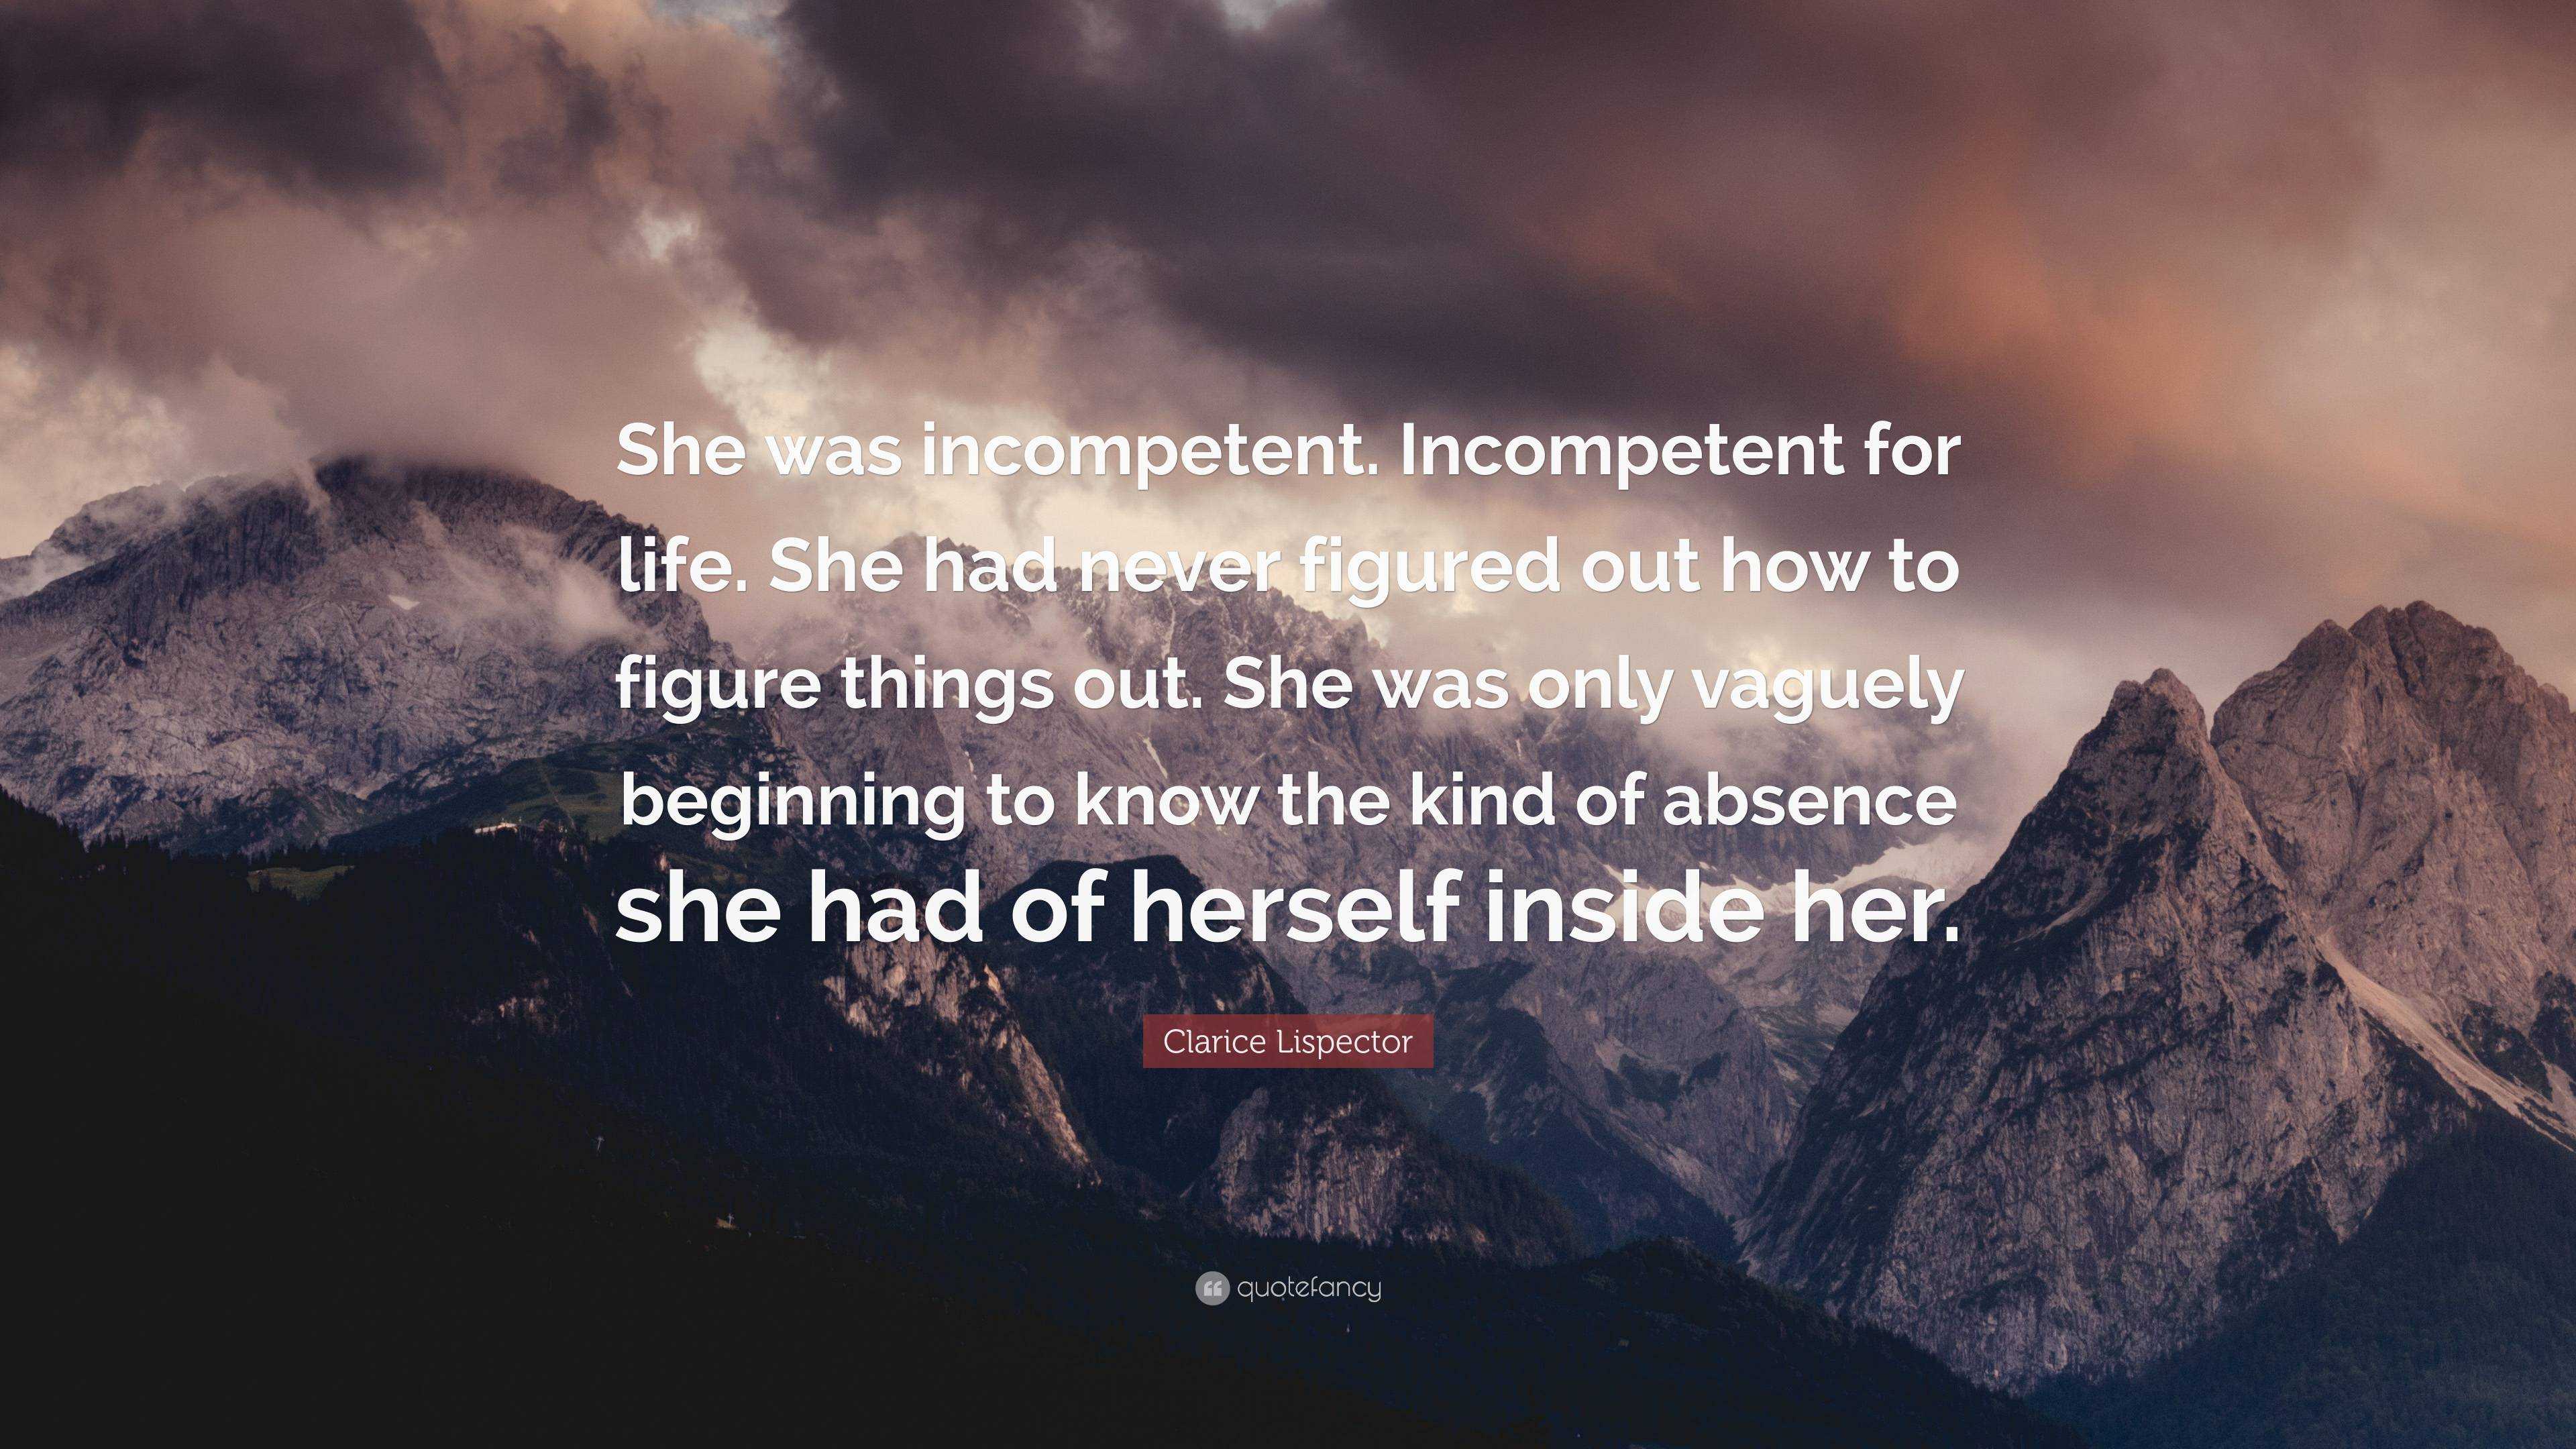 Clarice Lispector Quote: “She was incompetent. Incompetent for life ...